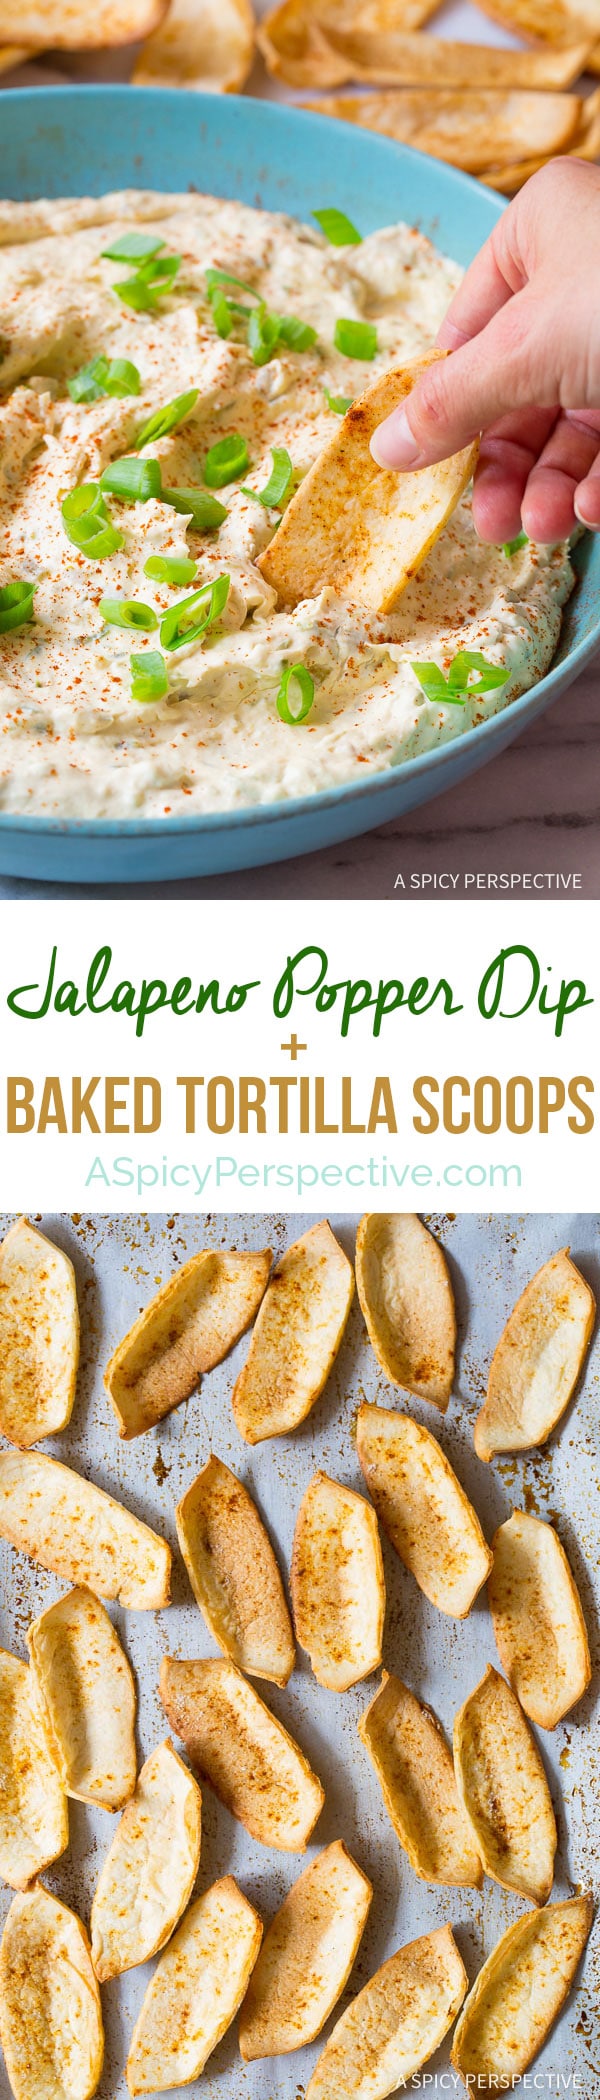 Creamy Stovetop Jalapeno Popper Dip with Fresh Baked Tortilla Scoops on ASpicyPerspective.com. A game day favorite that can be easily lightened-up for waistline watchers!